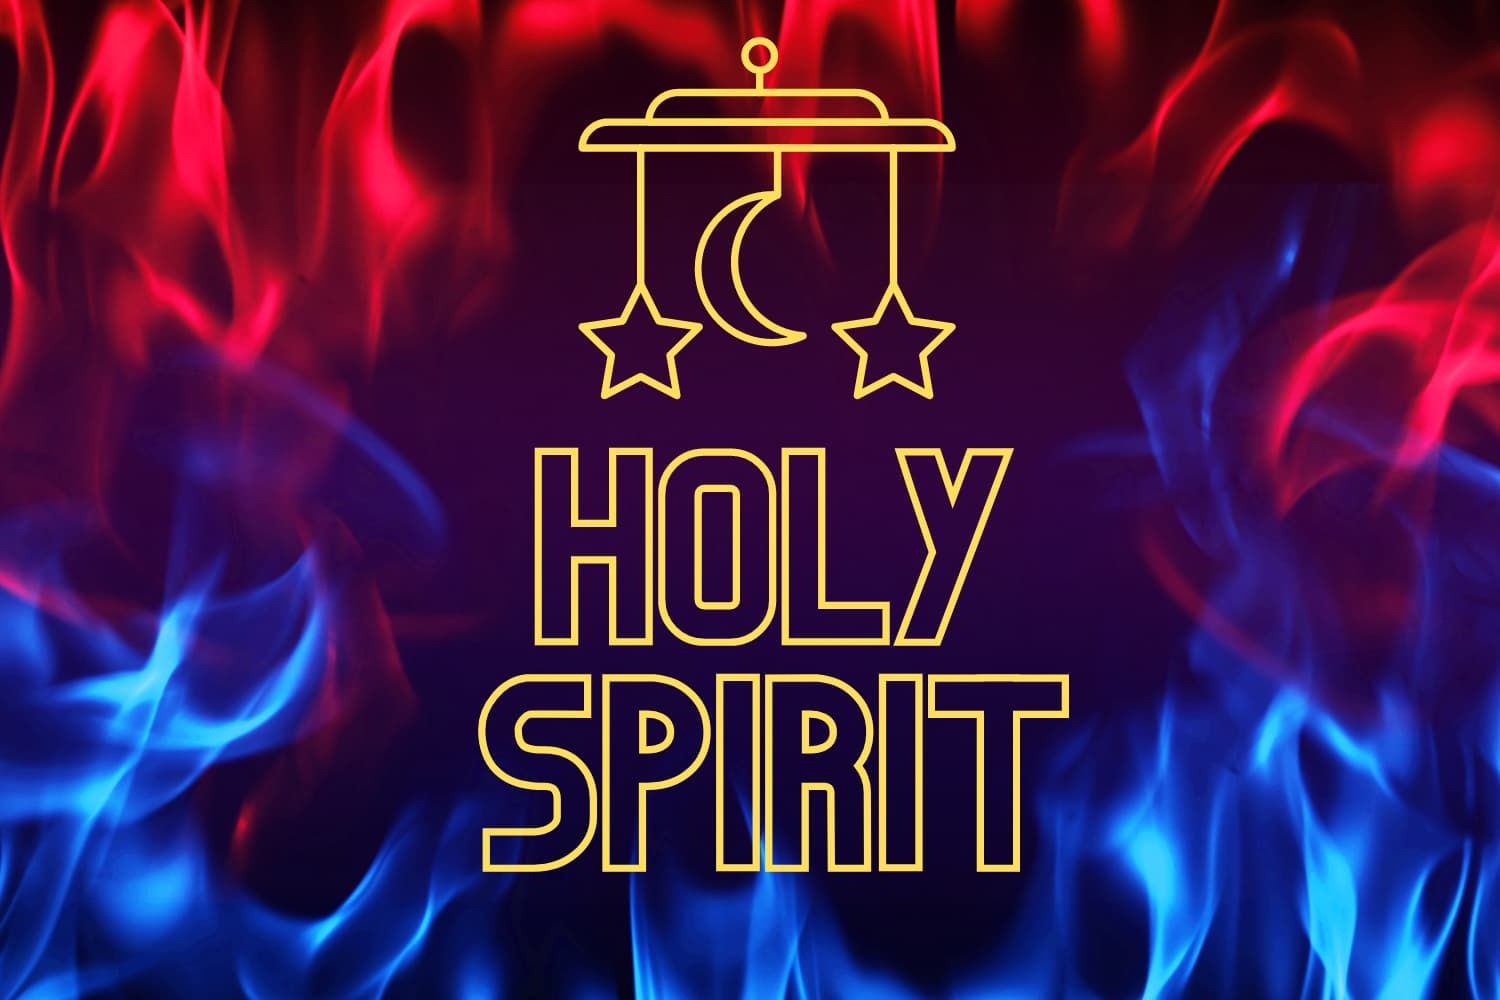 Craft%20-%20Christmas%203%20Mary%20meets%20Gabriel%20-%20Holy%20Spirit%20Dove%20mobile%20craft-67c48252 Holy Spirit - Gifts / power